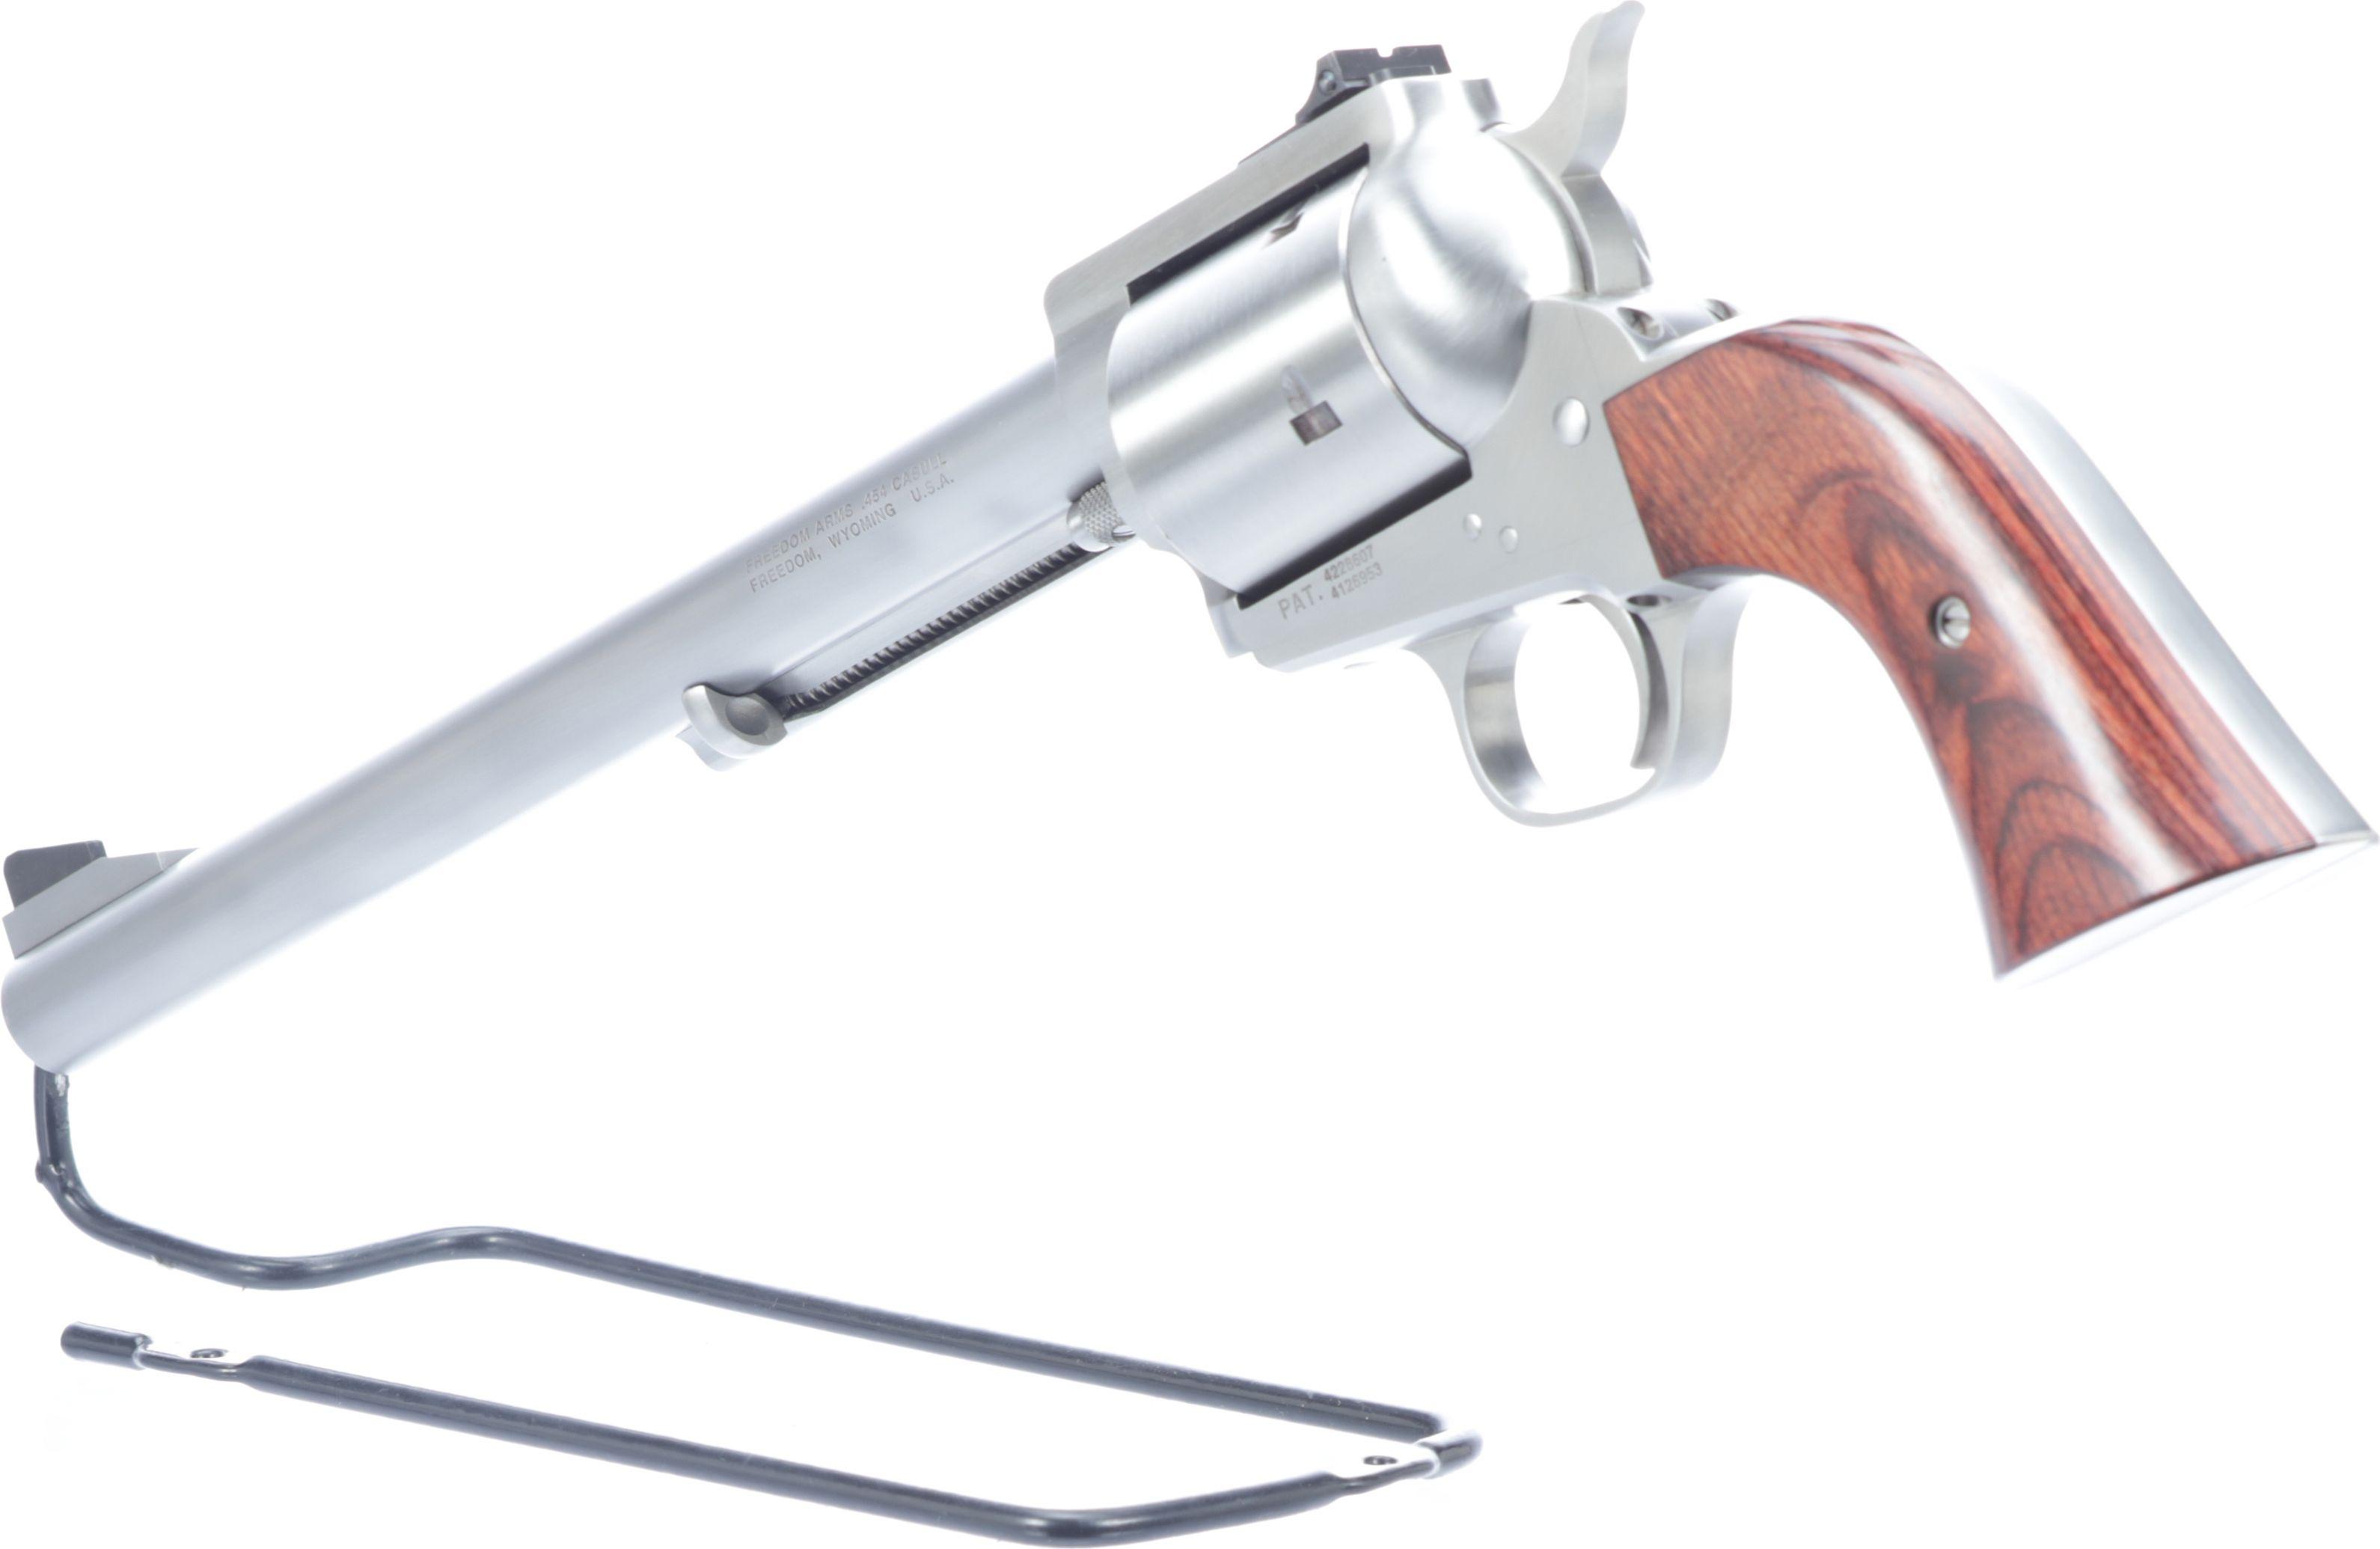 Freedom Arms Model 83 Single Action Revolver